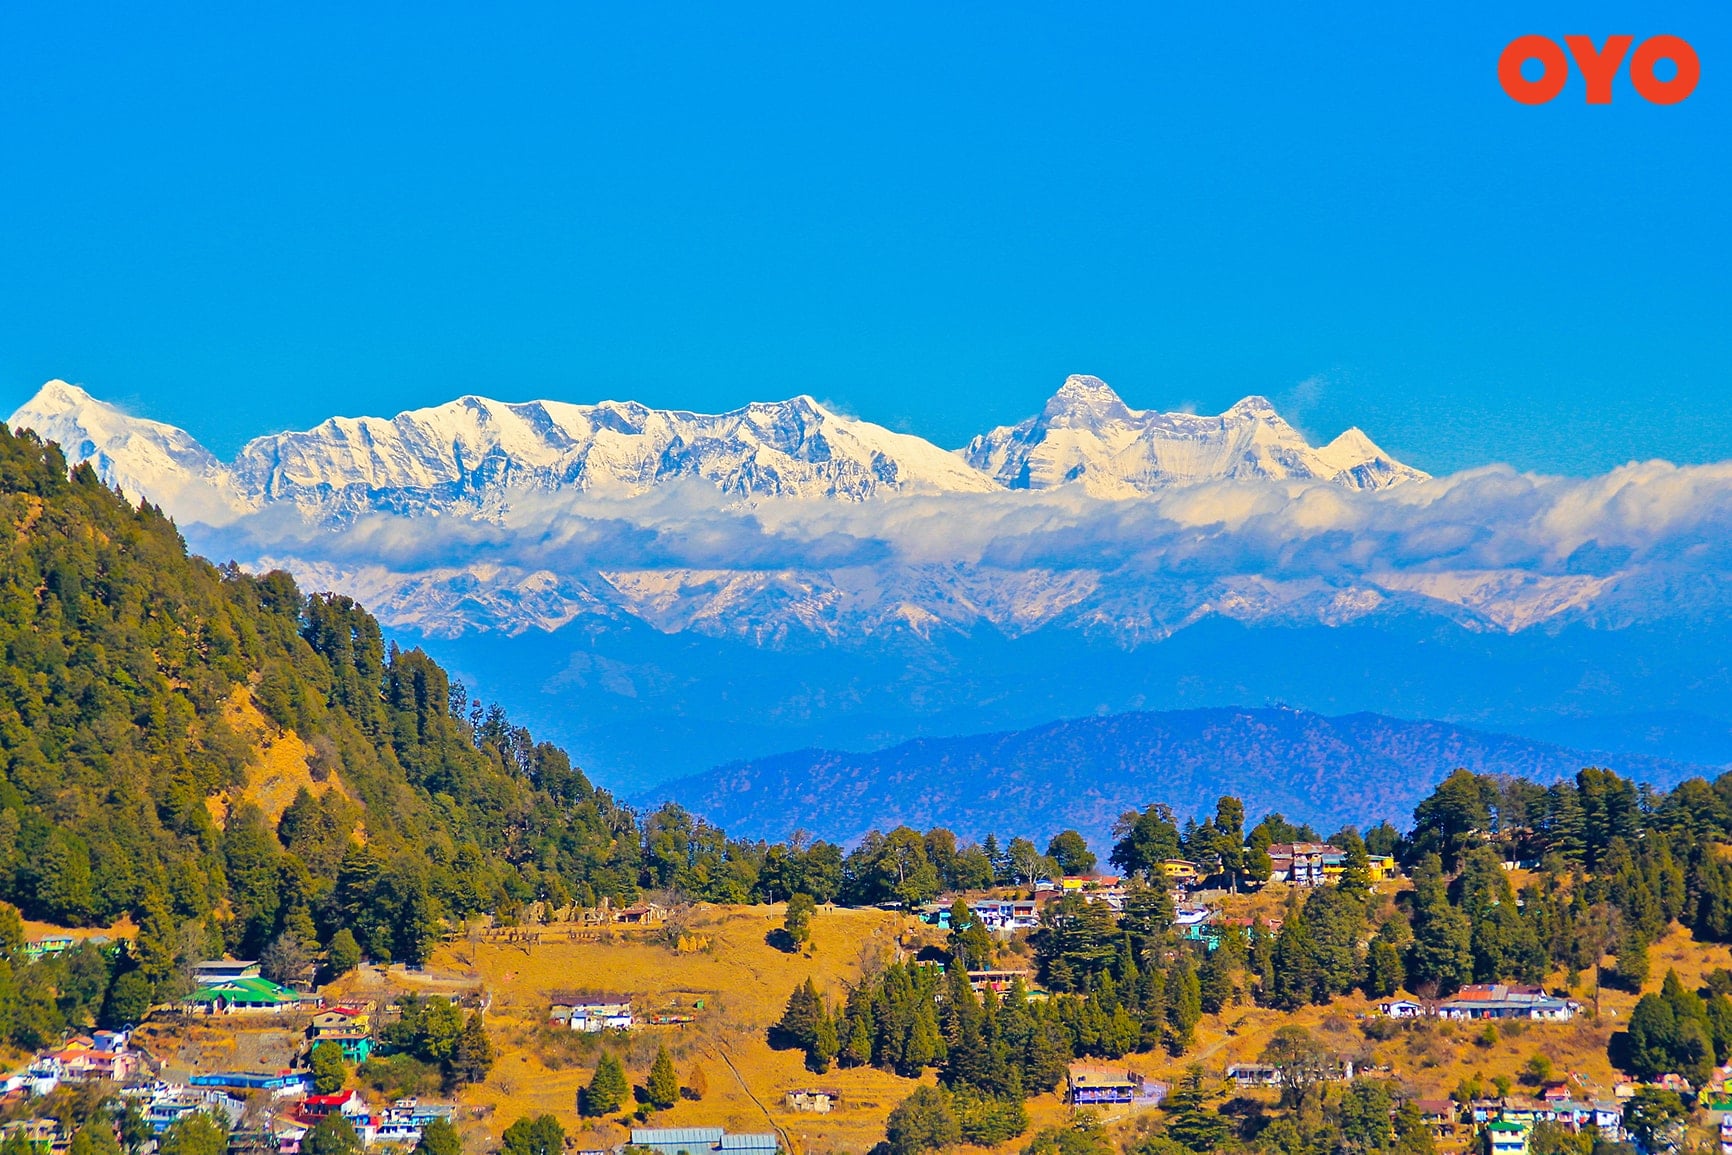 Mukteshwar - one of the best places to see snowfall in winter